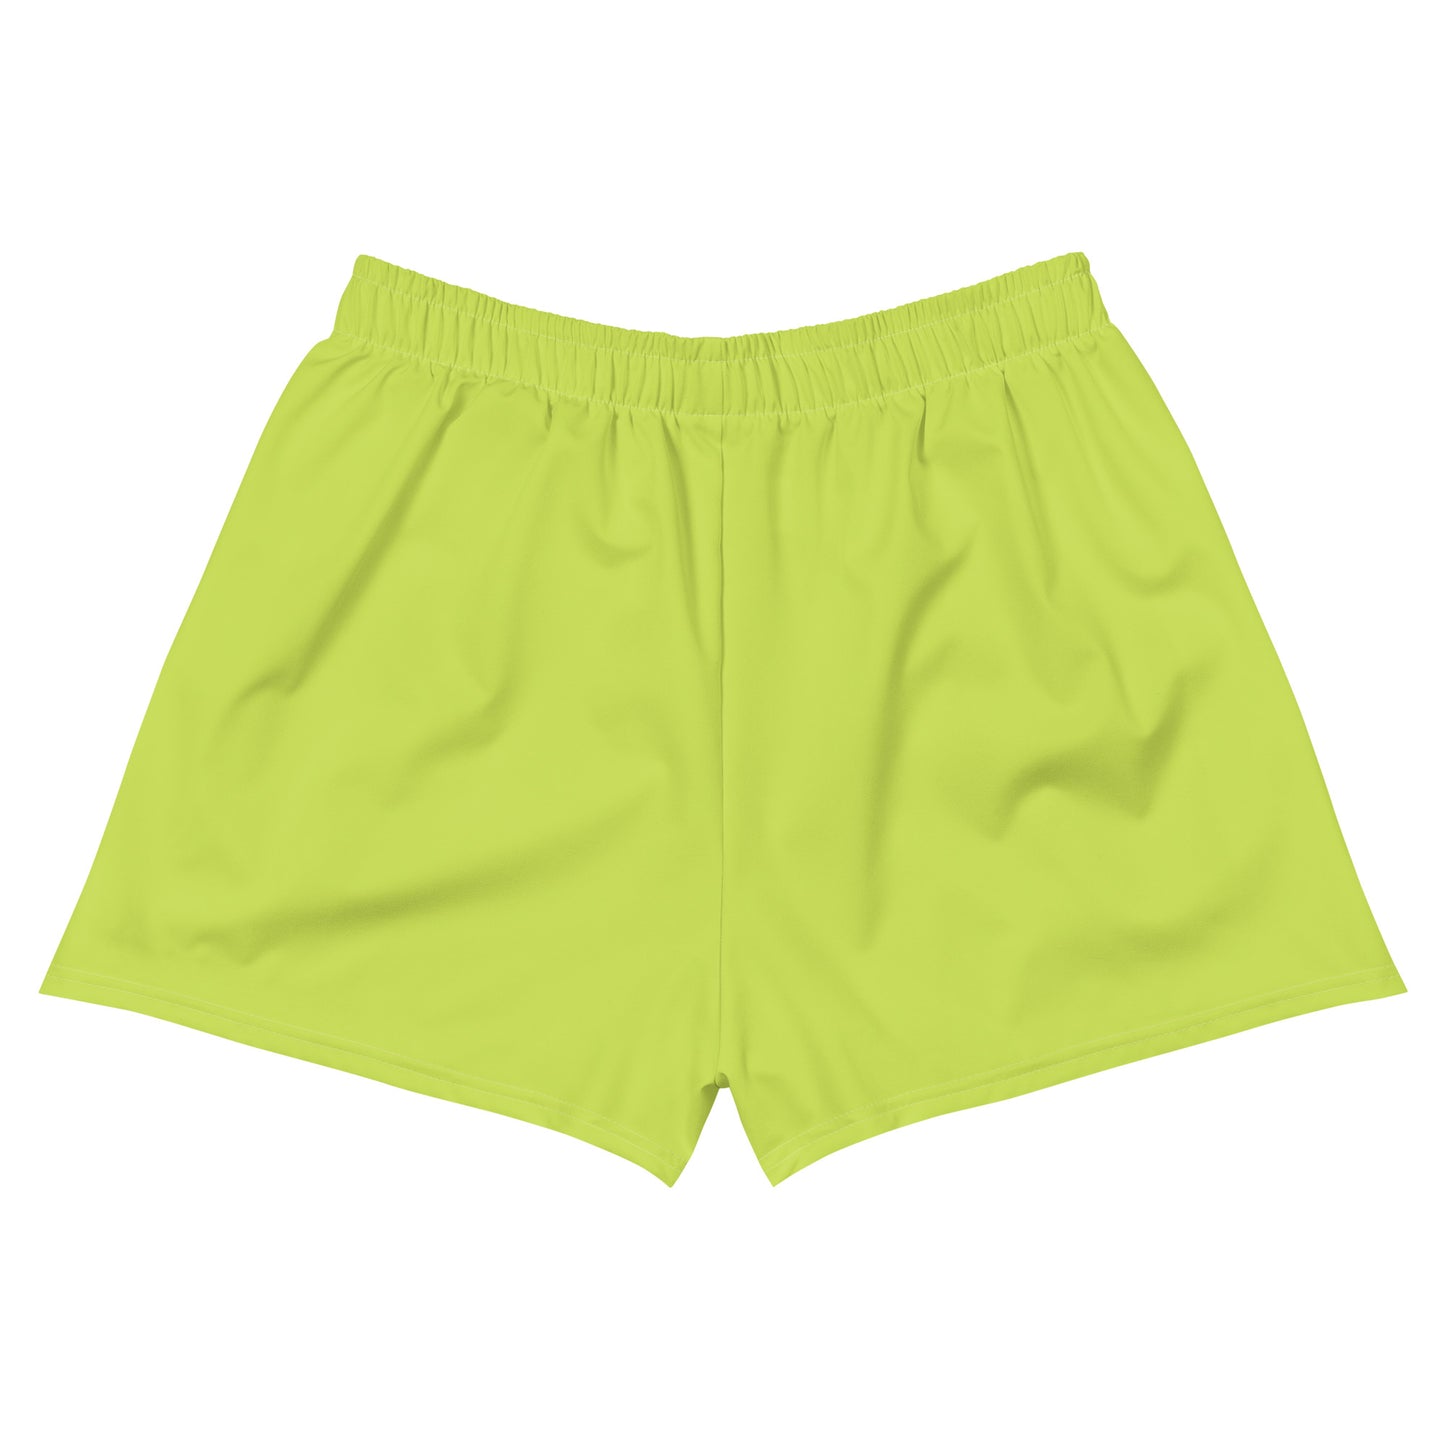 Women’s Electric Green  Athletic Shorts